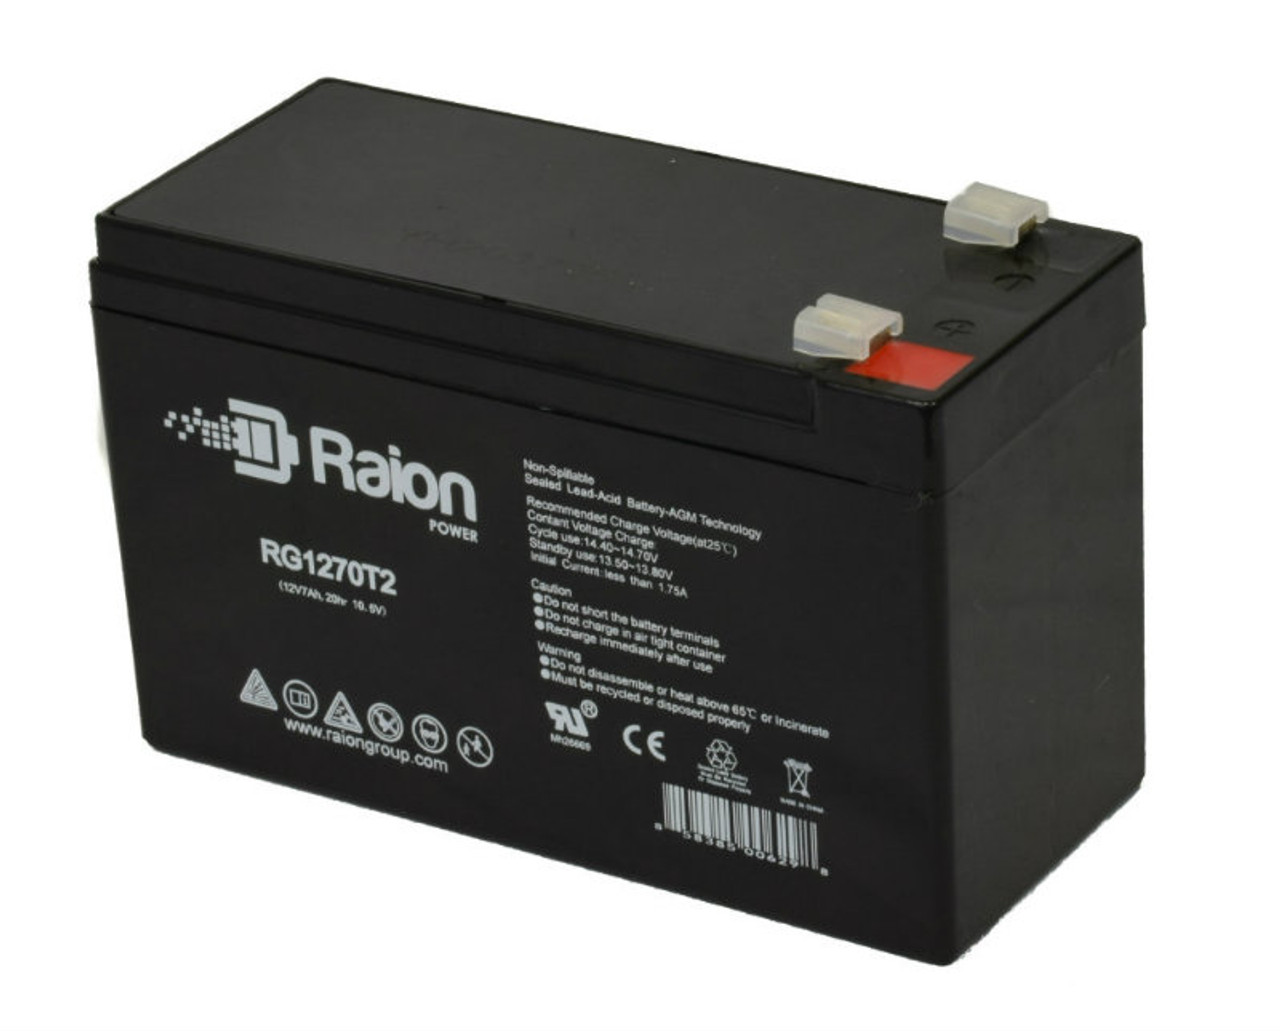 Raion Power Replacement 12V 7Ah Battery for Humminbird 587ci Combo Fish Finder - 1 Pack